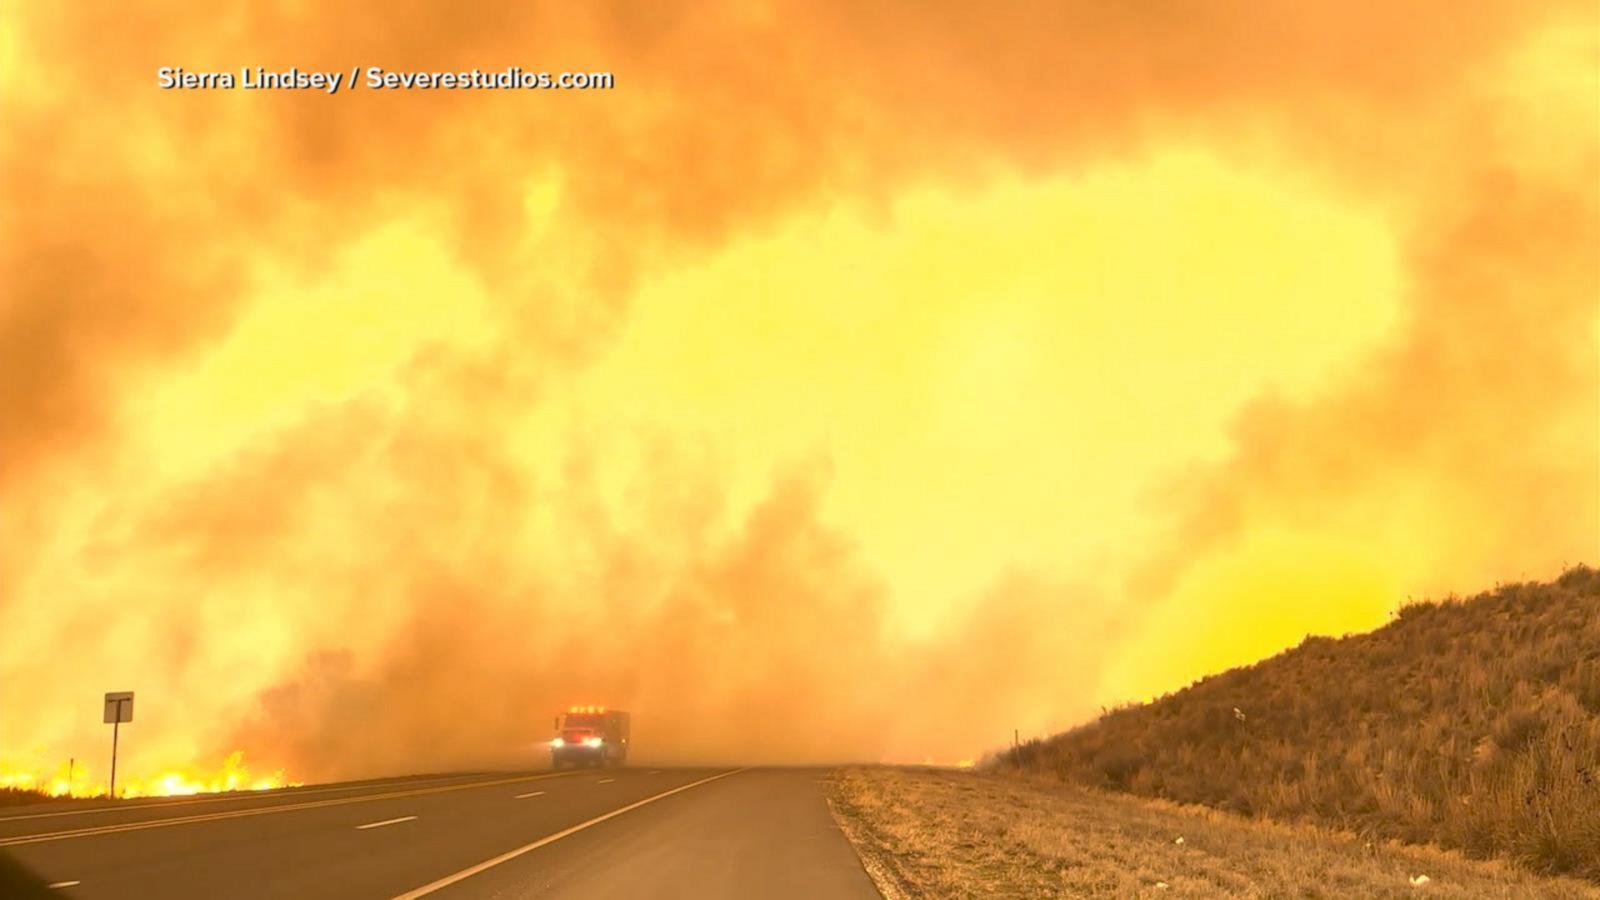 VIDEO: Evacuations and shelter-in-place orders issued as Texas battles wildfires